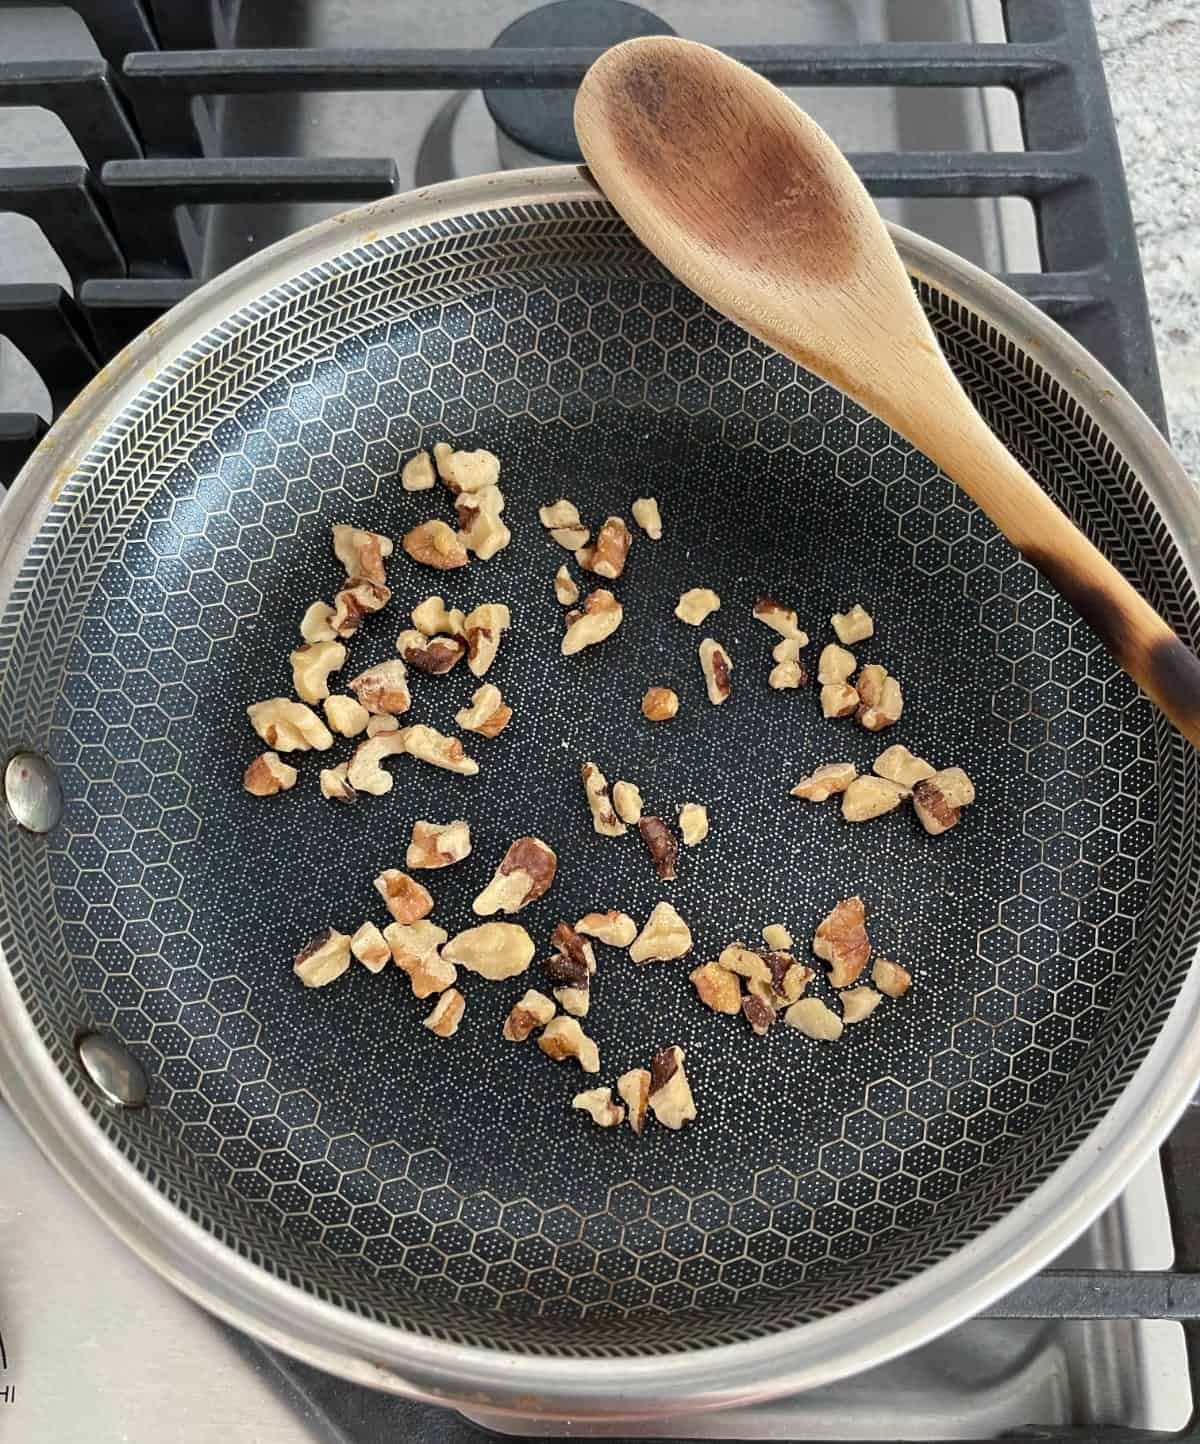 Toasting walnuts in small dry skillet.